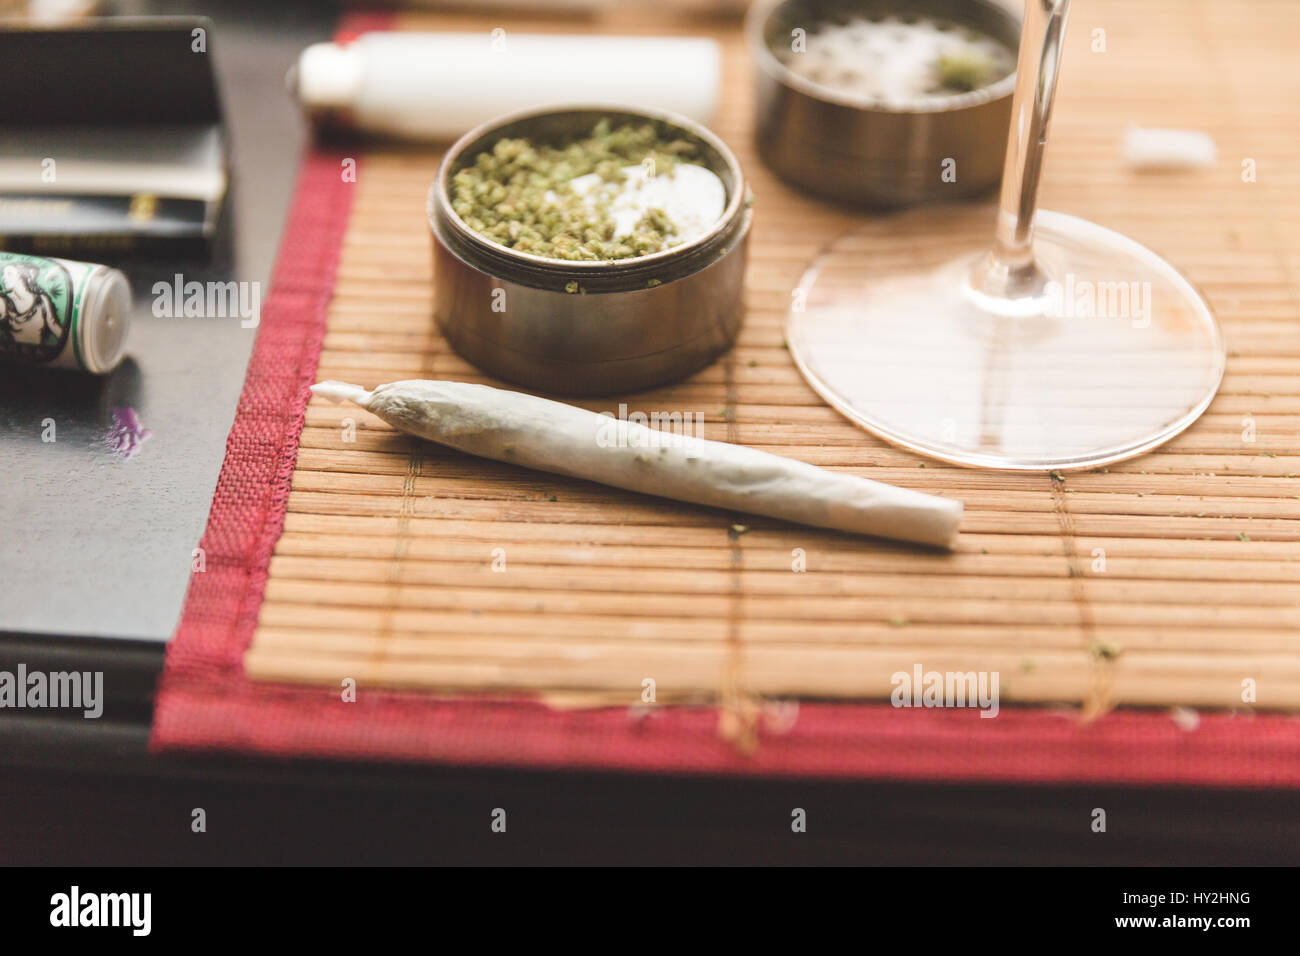 Joint, grinder, cannabis buds, and related items on a table. Stock Photo